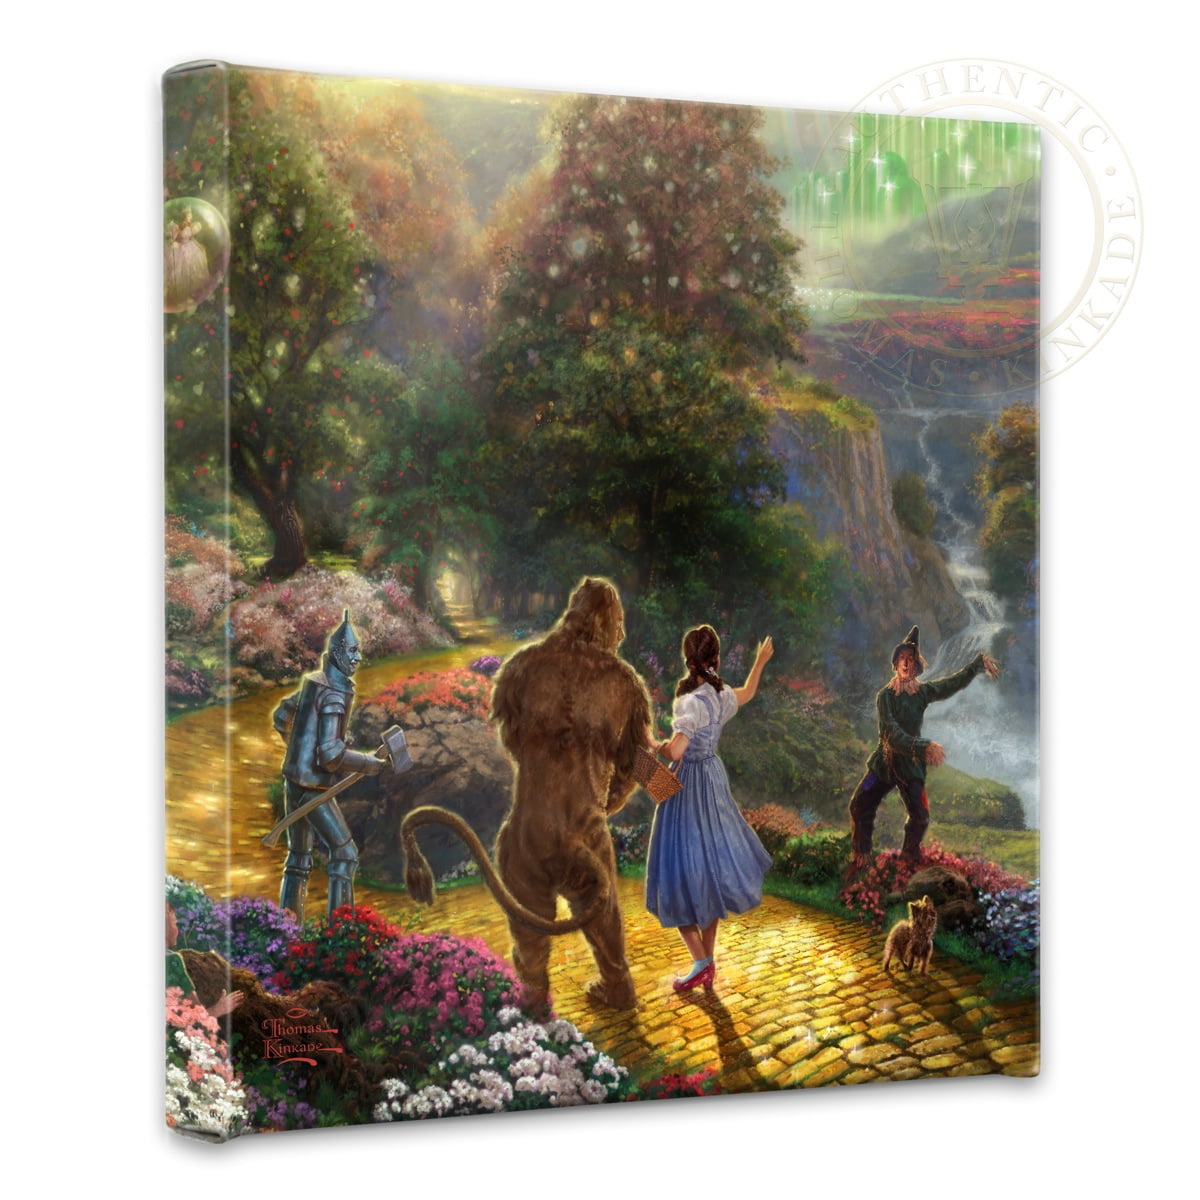 NEW The Wizard of Oz Four Friends and Emerald City Stretched Canvas Wall Art 